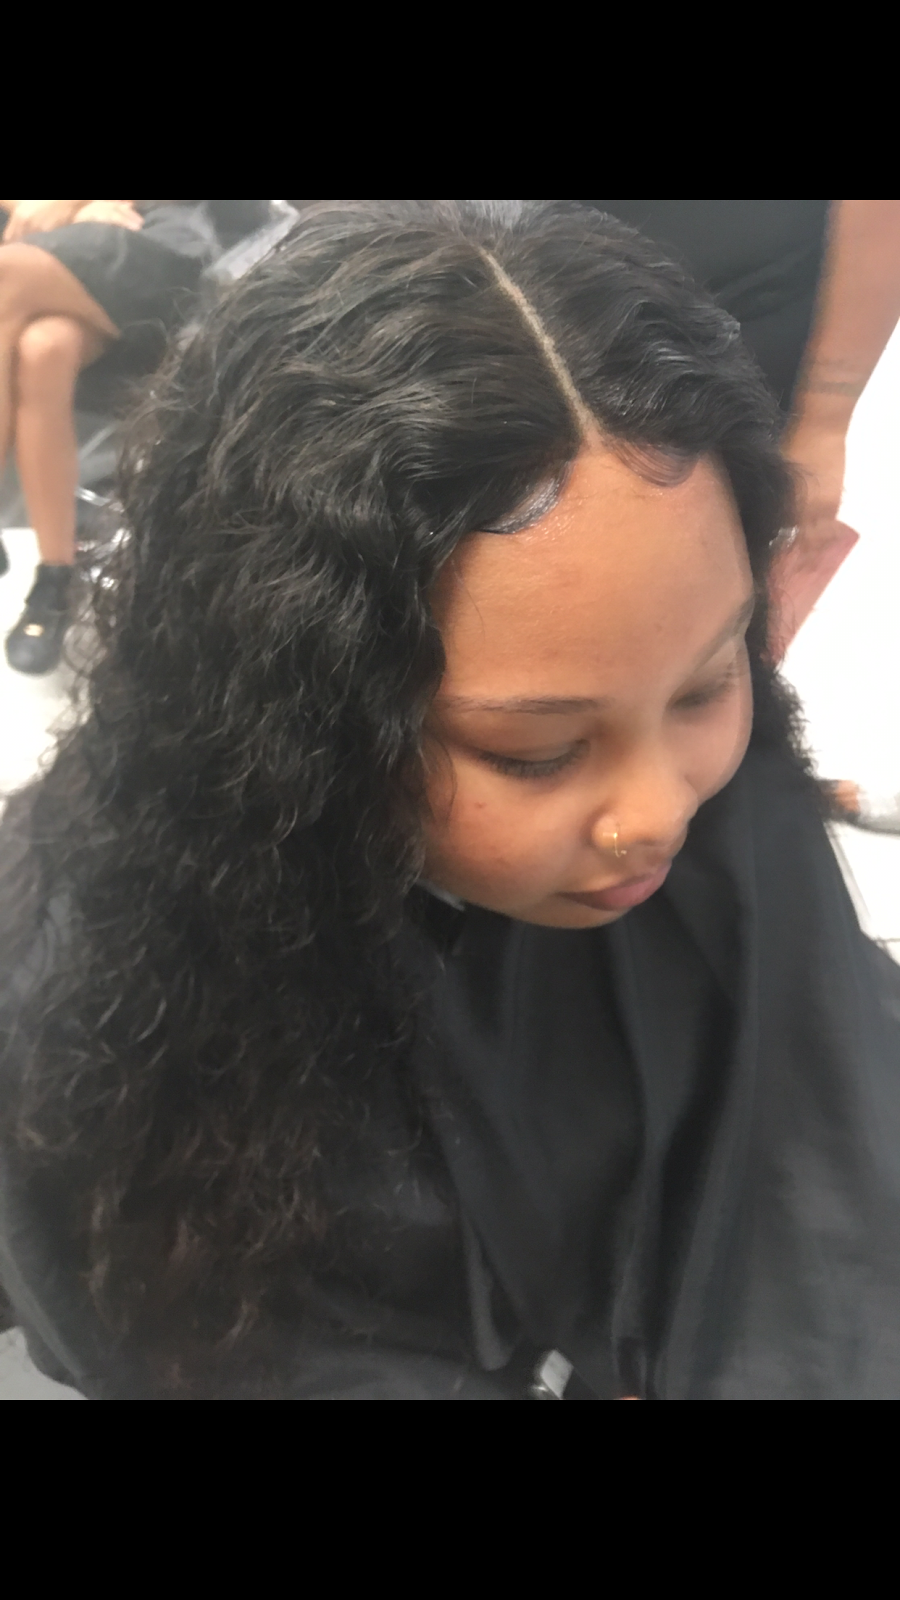 Styled By Neicey | 1544 Broadway, Gary, IN 46404, USA | Phone: (219) 276-9019